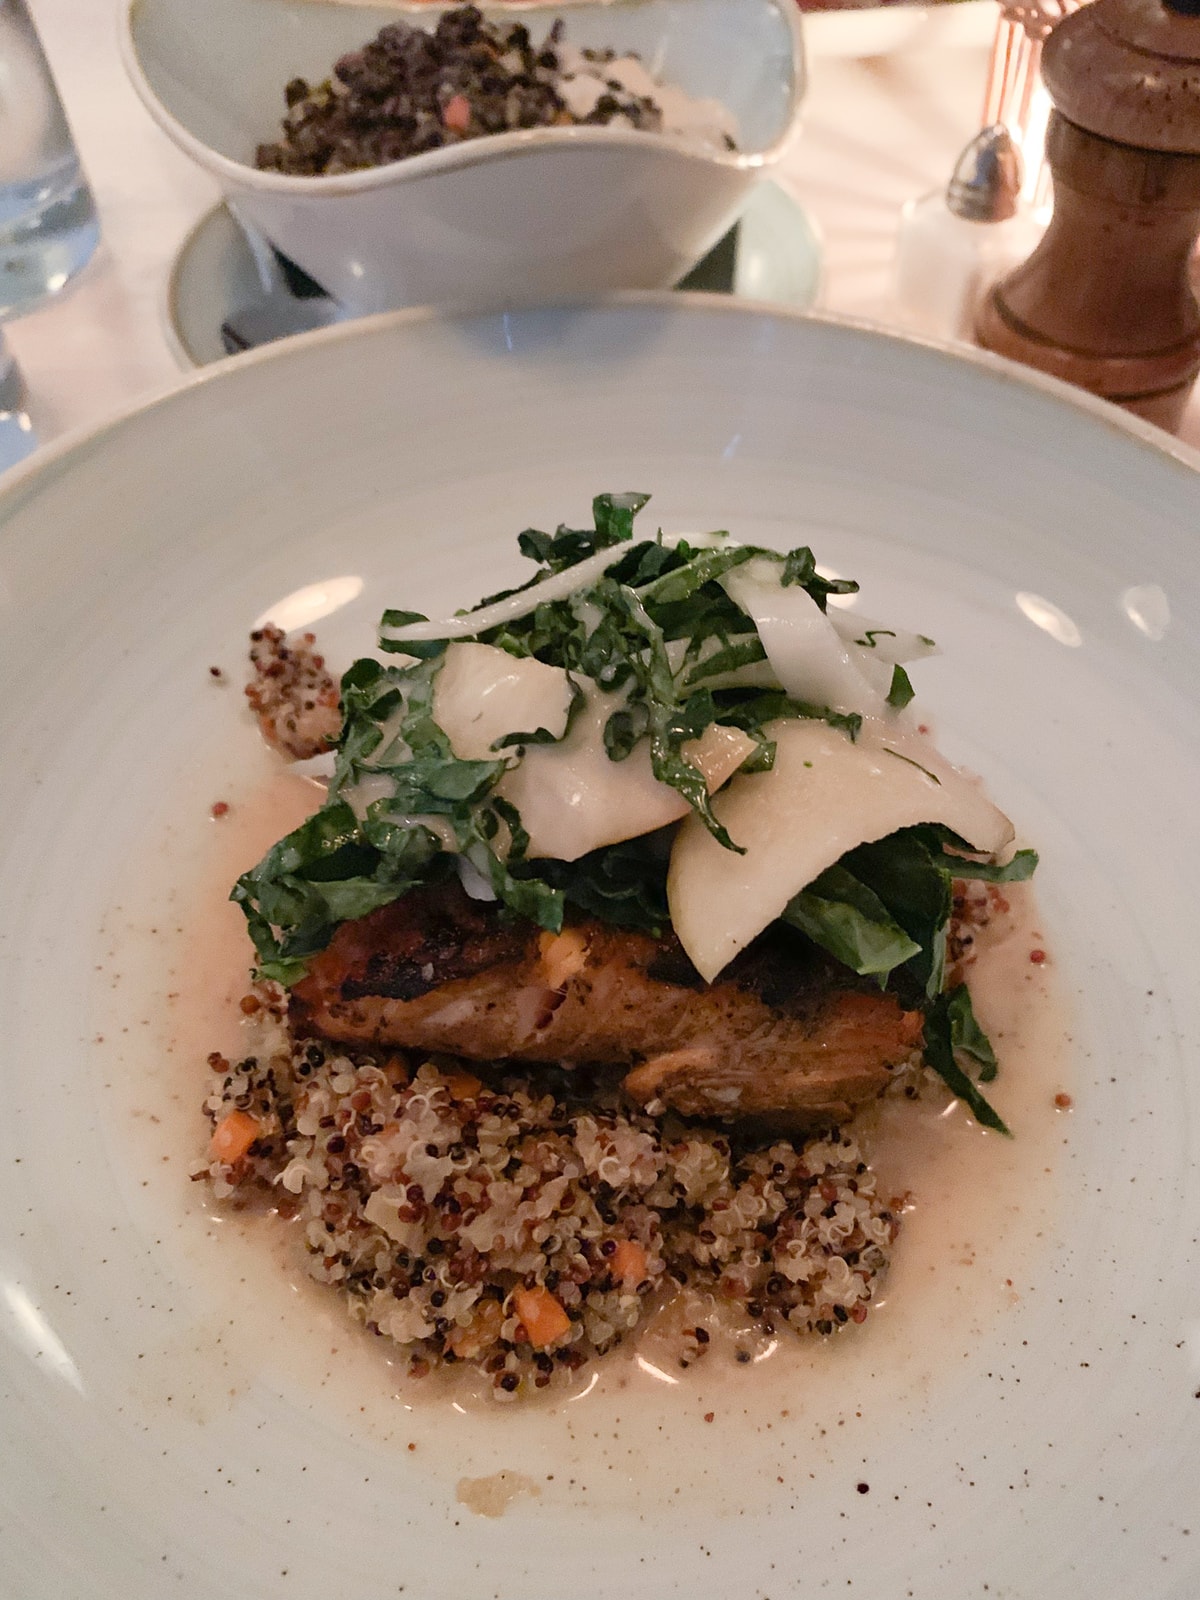 Salmon on top of quinoa with a side salad